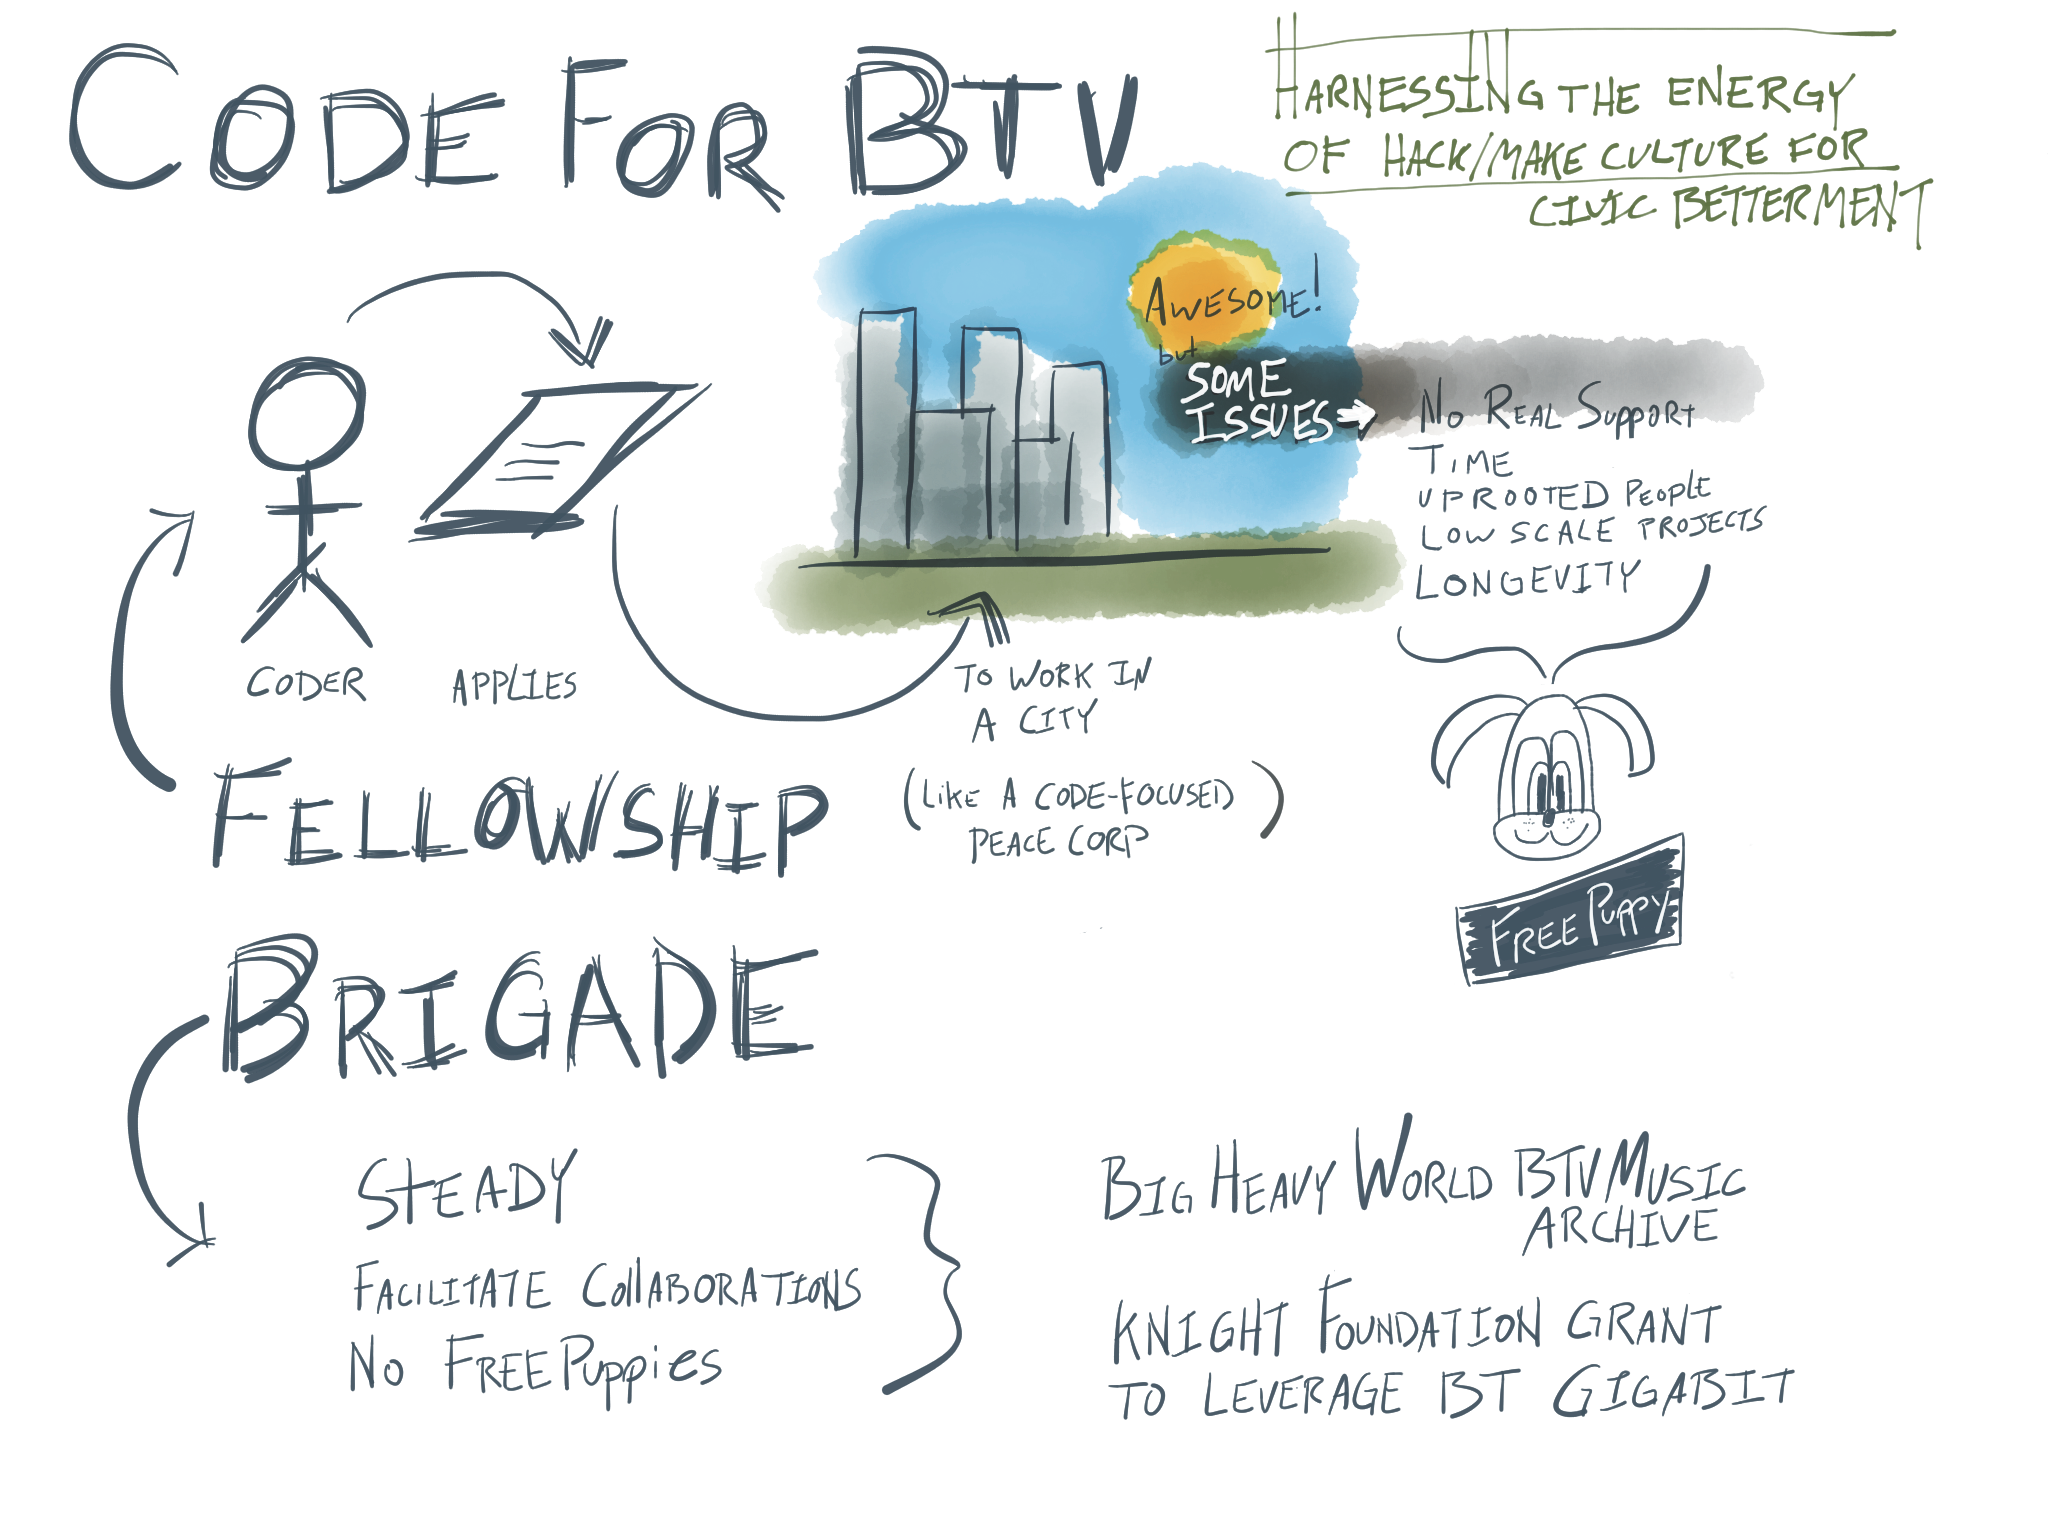 CodeForBTV: harnessing the energy of hack/make culture for civic betterment. Fellowship: coder applies to work in a city (like a code-focused peace corp). Awesome, but some issues: no real support, time, uprooted people, low scale projects, longevity--a free puppy. Brigade: steady, facilitate collaborations, no free puppies. Big Heavy World BTV Music Archive, Knight Foundation Grant to leverage BT Gigabit.